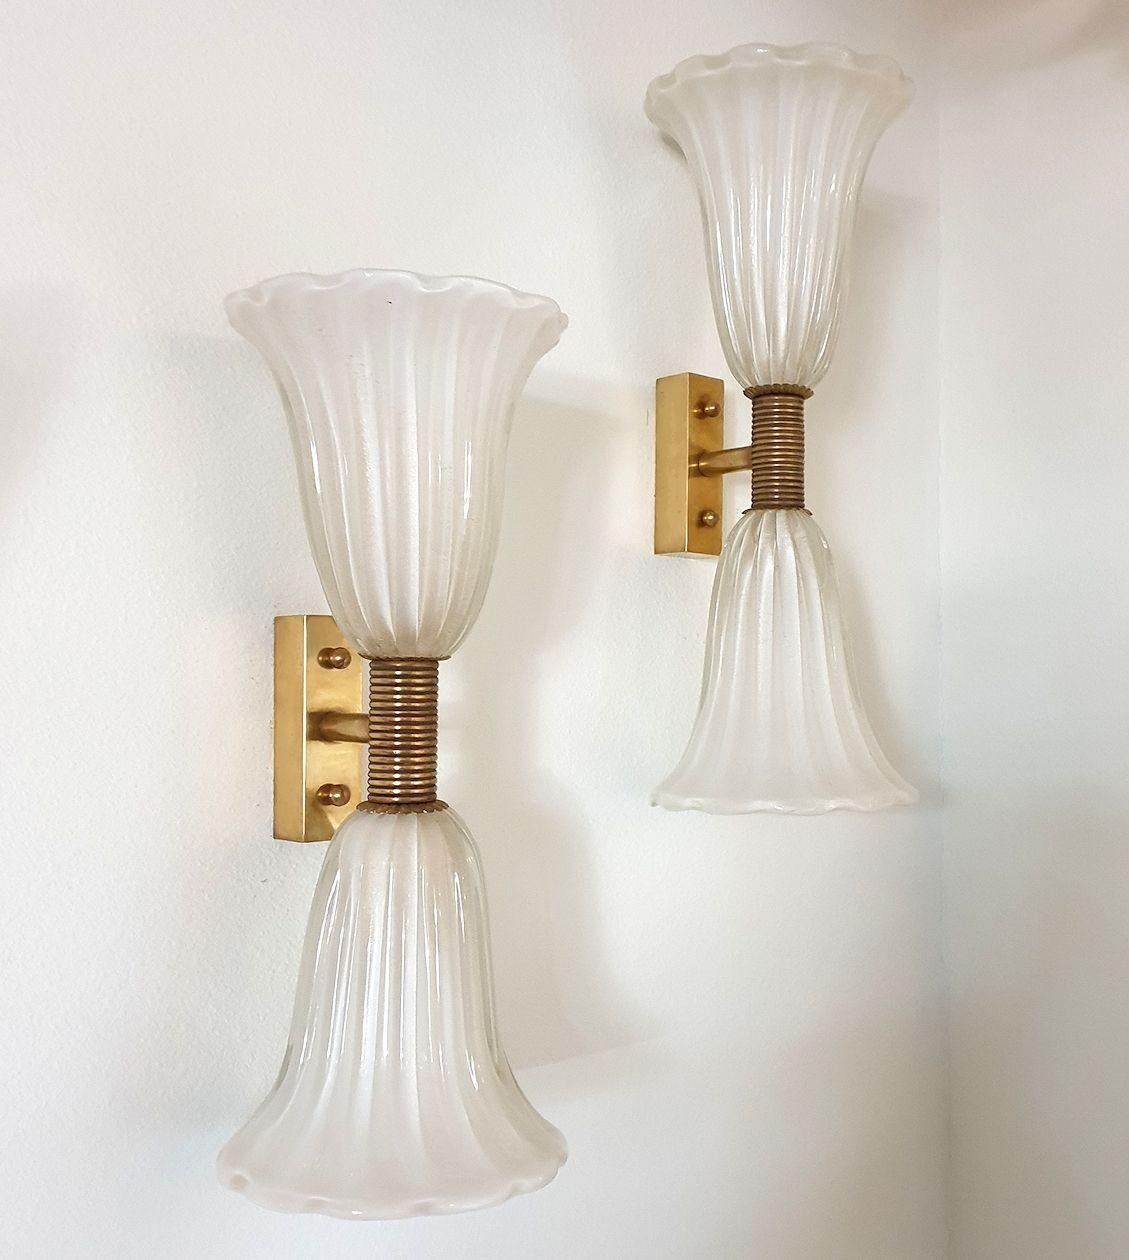 Pair of Mid-Century Modern white Murano glass & brass sconces by Barovier and Toso, Italy 1960s.
The vintage sconces have 2 corolla shades each; with one light in each, one light up, one light down.
Rewired for the US.
The Murano glass is hand